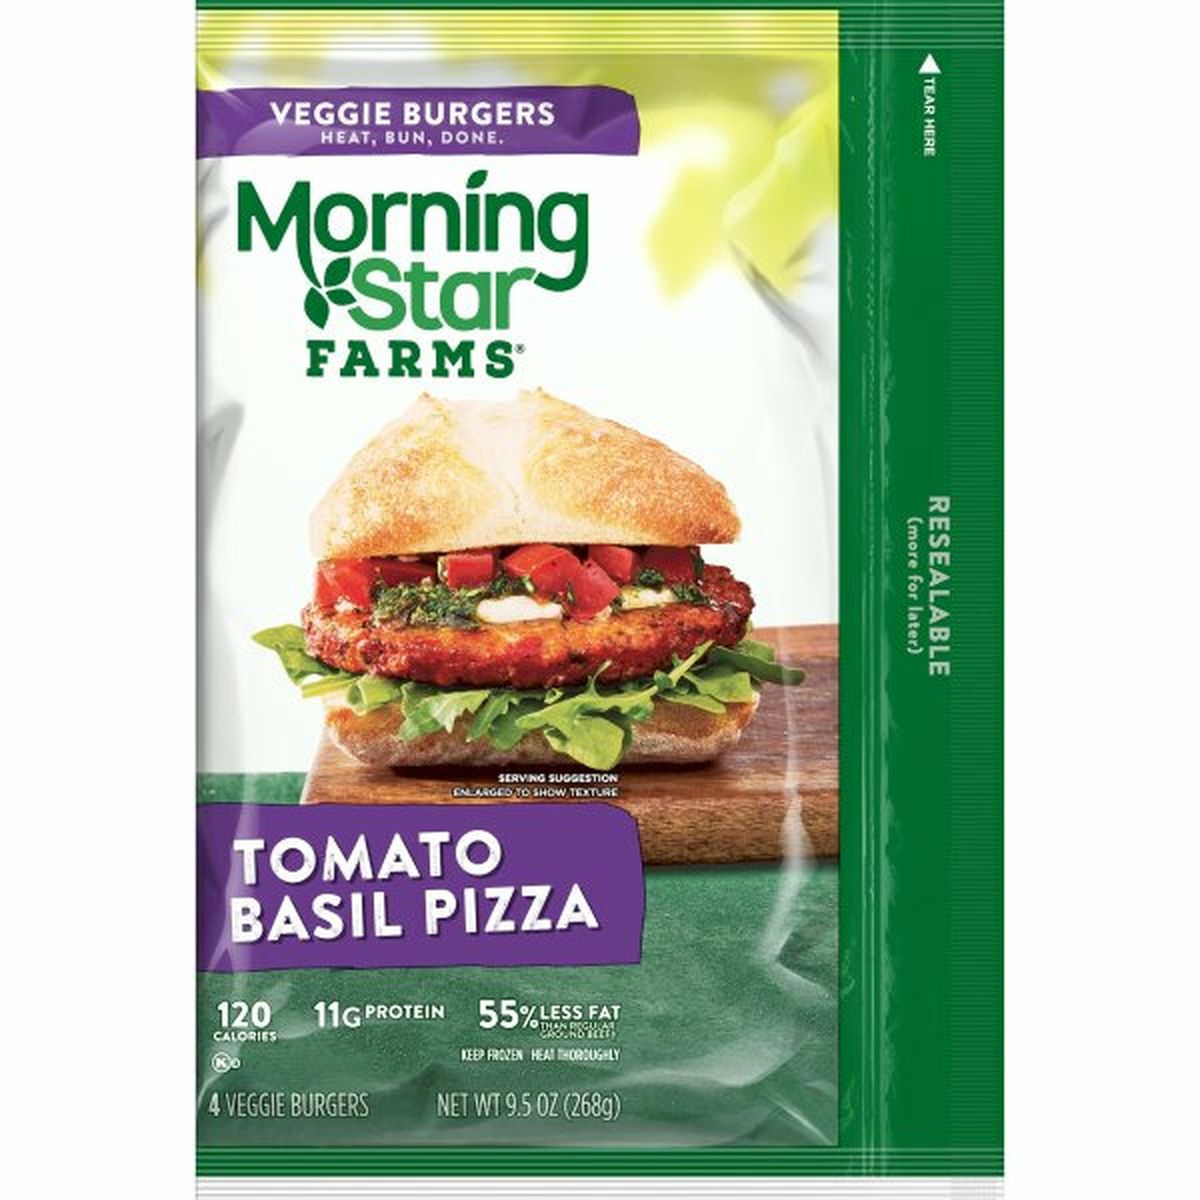 Calories in Morning Star Farms Veggie MorningStar Farms Veggie Burgers, Tomato Basil Pizza, Vegetarian Excellent Source of Protein, 9.5oz